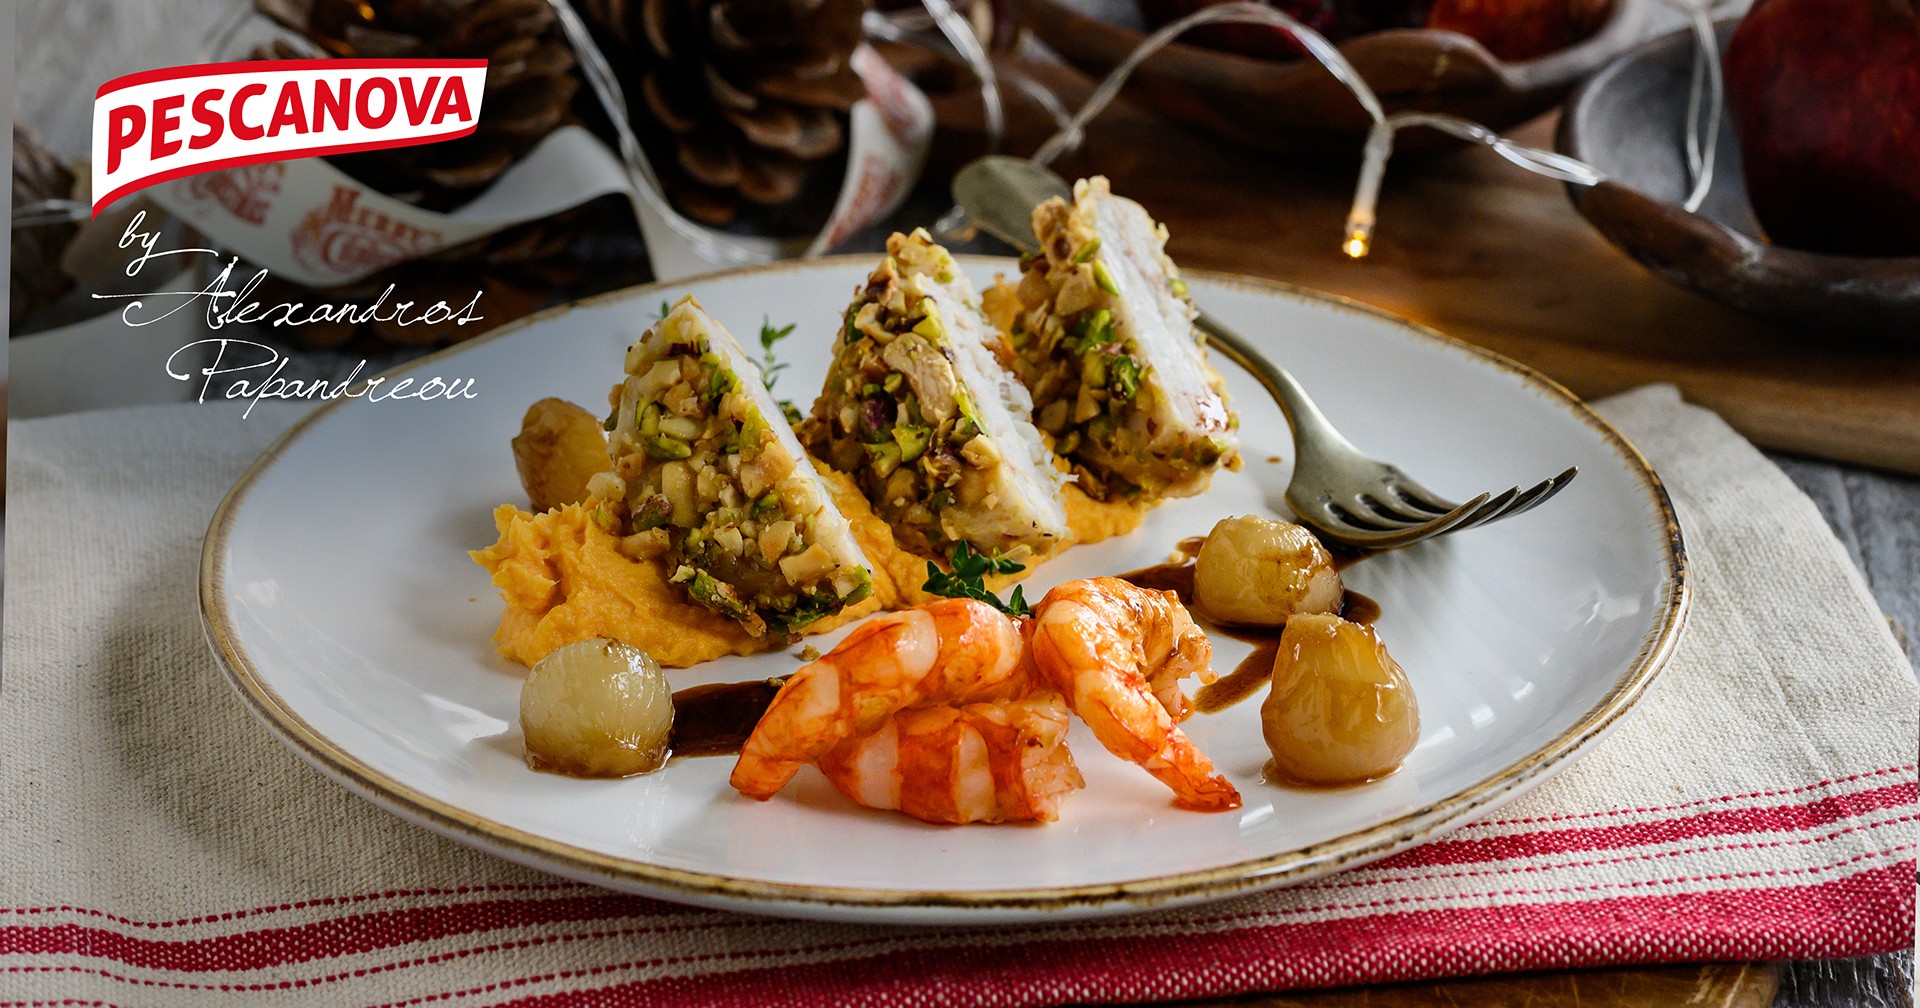 Breaded cod with nuts, and prawns, mash sweet potatoes and caramelized onions